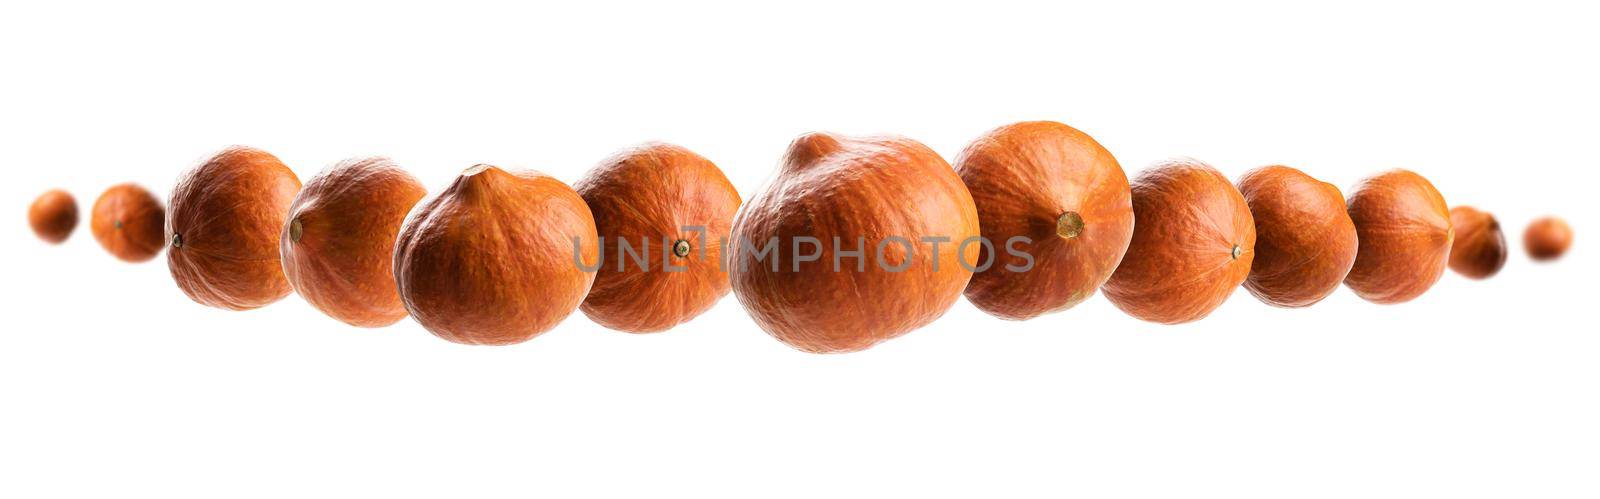 Ripe pumpkins levitate on a white background by butenkow